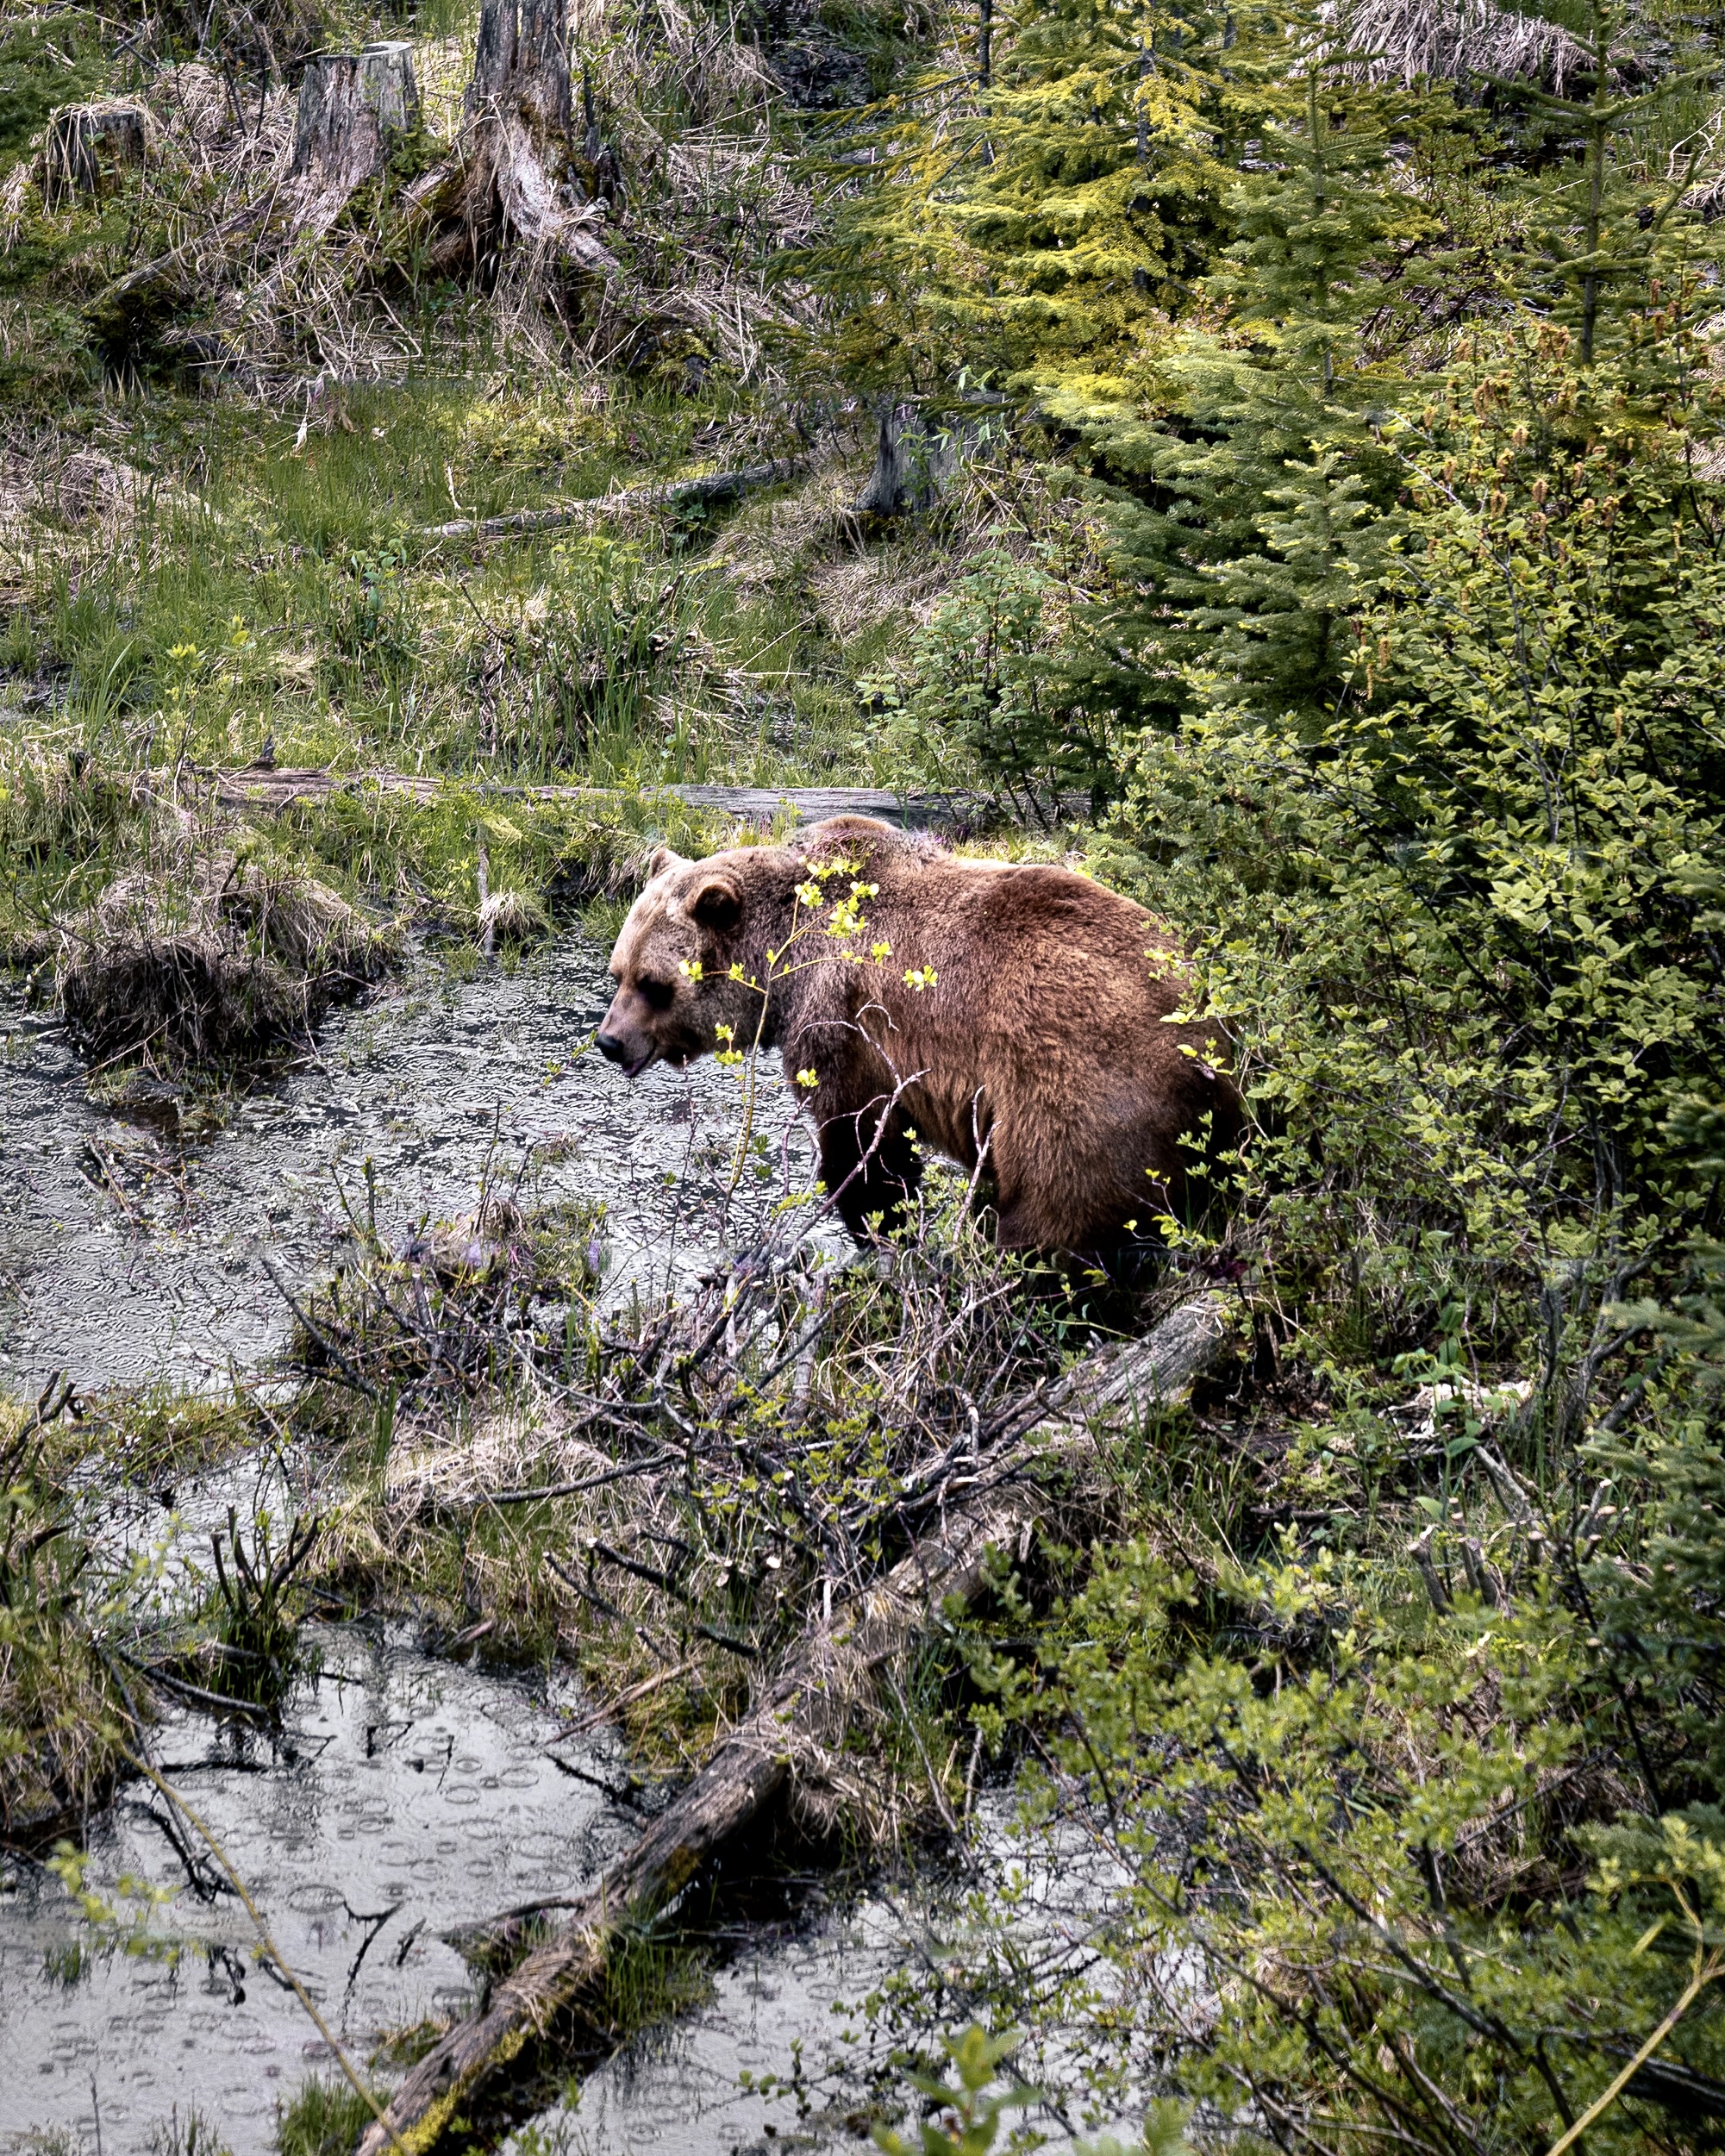 Boo the bear kicking horse grizzly bear refuge Canada